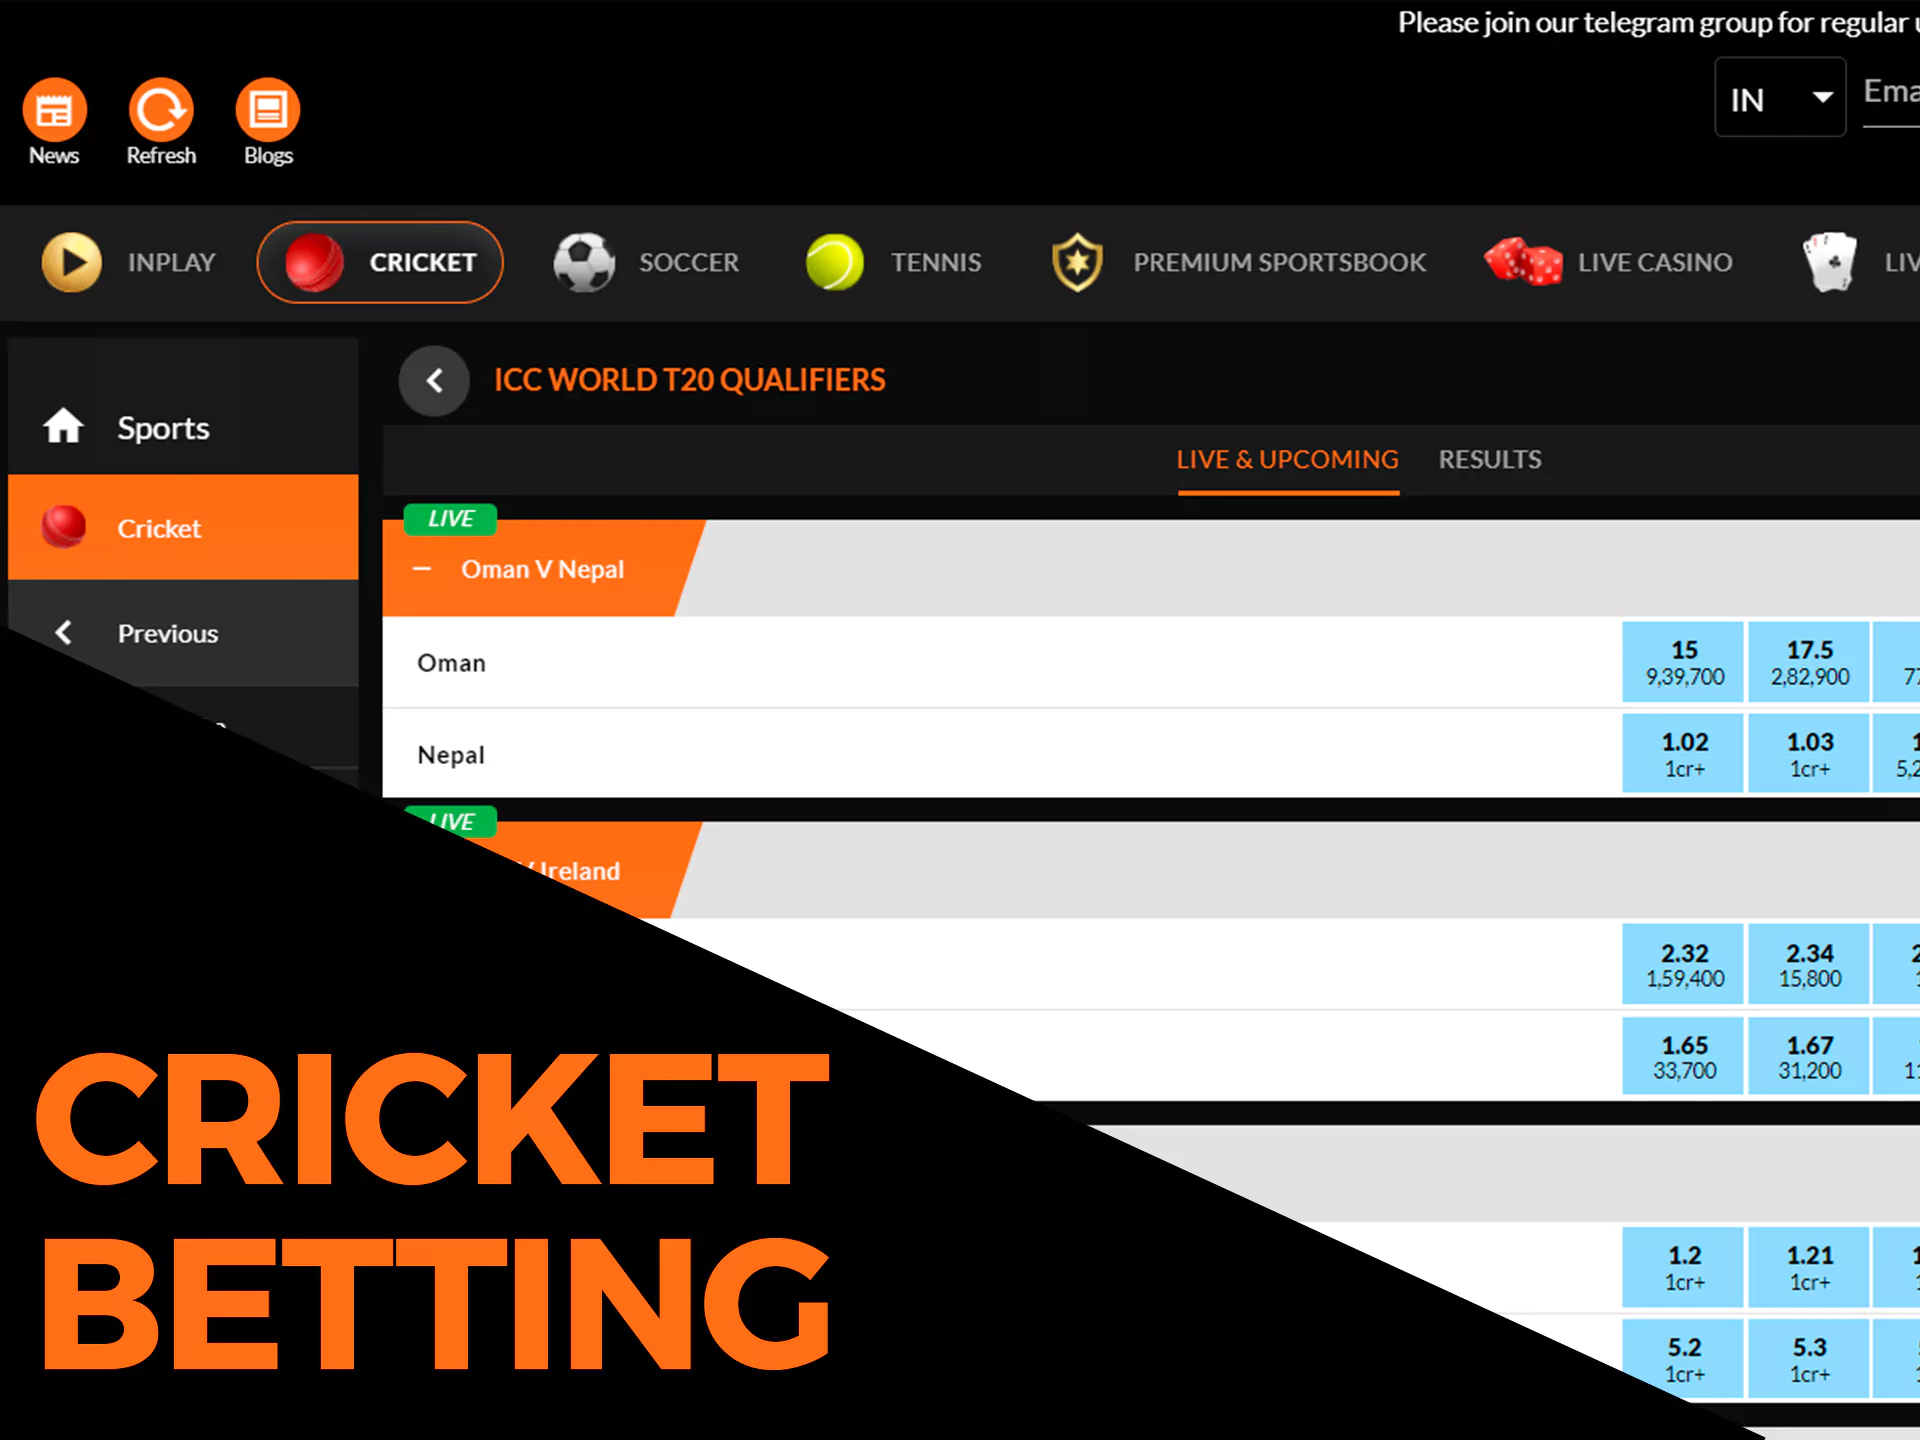 Place bets on IPL events in the Fairplay sportsbook.